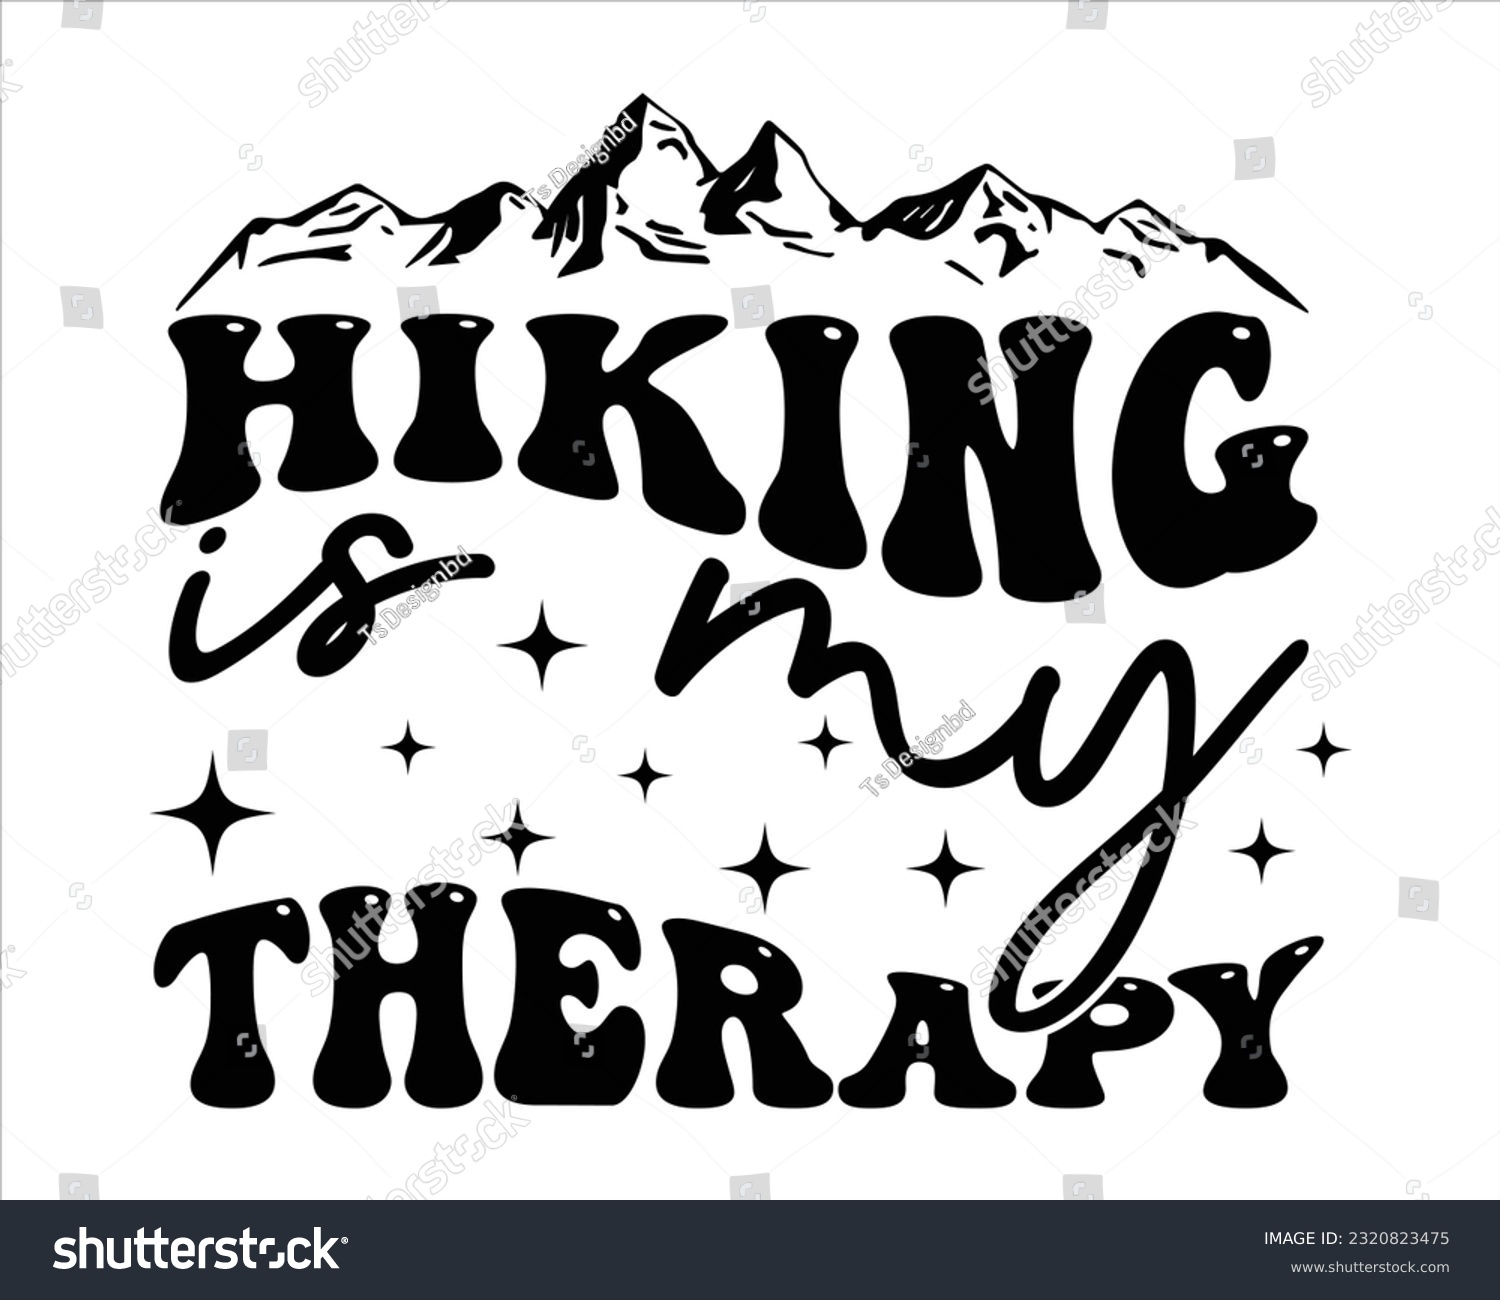 SVG of Hiking is My Therapy Retro Svg Design,Hiking Retro Svg Design, Mountain illustration, outdoor adventure ,Outdoor Adventure Inspiring Motivation Quote, camping, hiking,groovy design svg